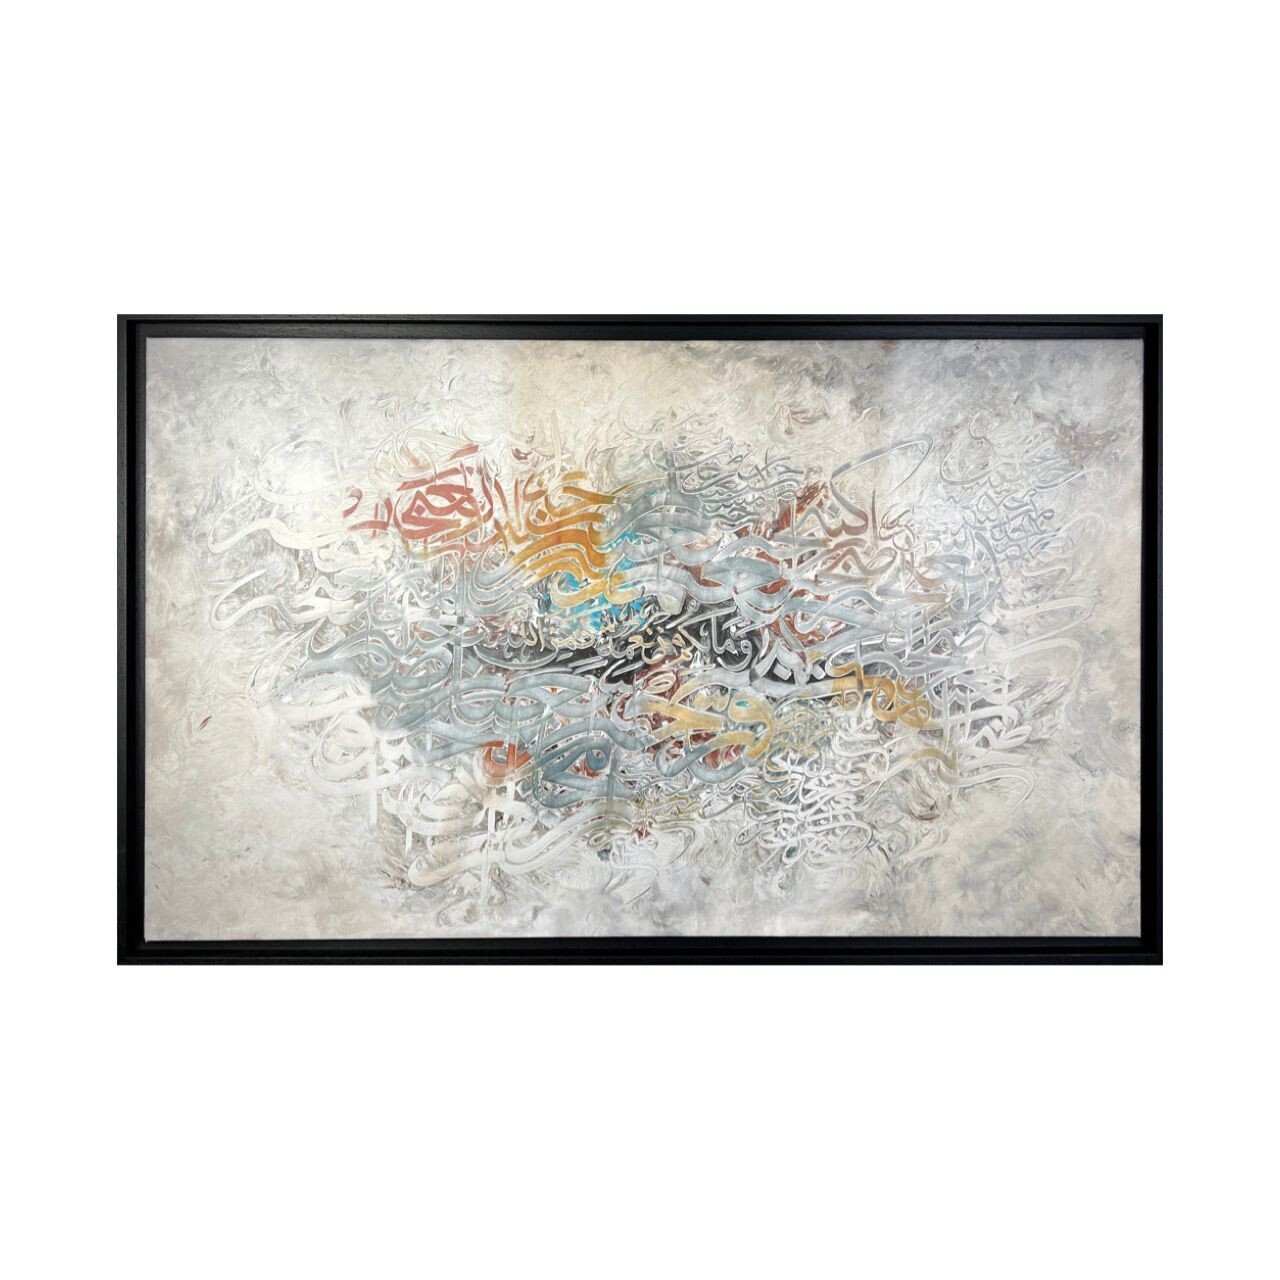 Blessings are from Allah, Surah An-Nahl, 16:53. Abstract Giclee Premium Print Canvas